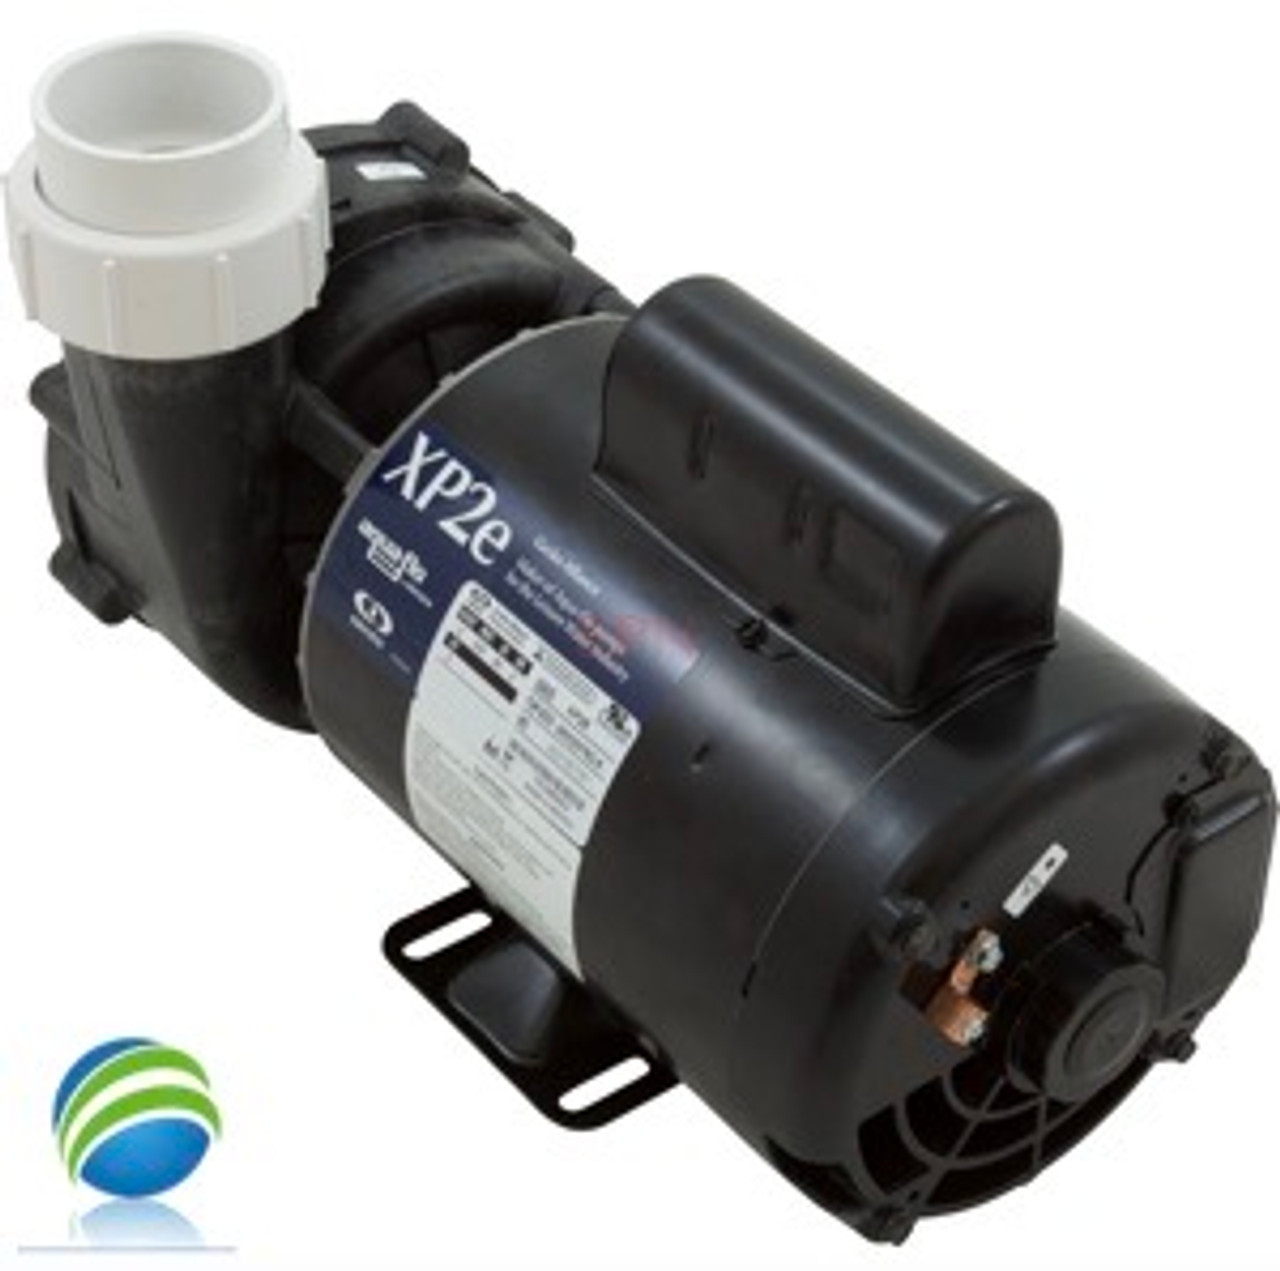 Complete Pump, Aqua-Flo, XP2e, 3.0HP, 230v, 56fr, 2 1/2"X 2" 1 or 2 Speed 10A
The inlet measures about 3 11/16" across the threads.
The outlet measures about 3" across the threads.